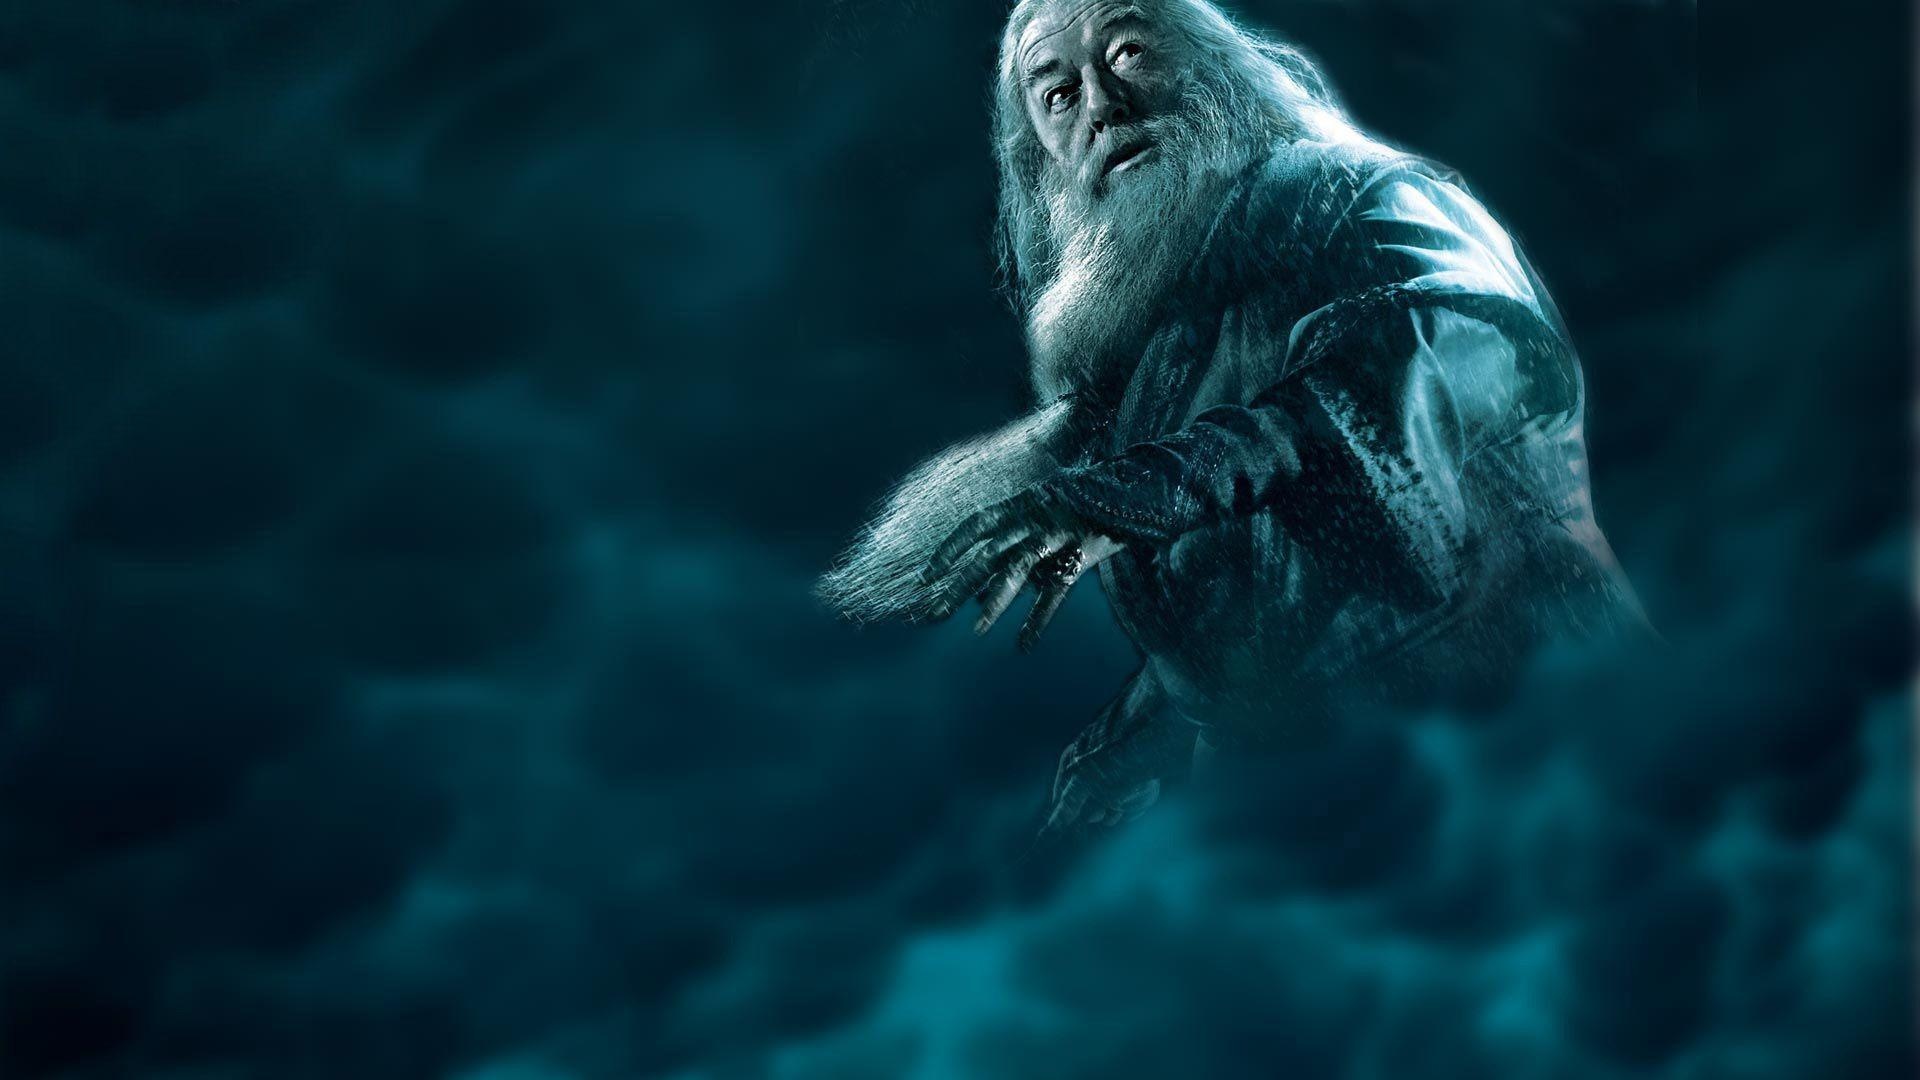 Dumbledore: A half-blood, Muggle-supporting wizard, the son of Percival and Kendra Dumbledore. 1920x1080 Full HD Wallpaper.